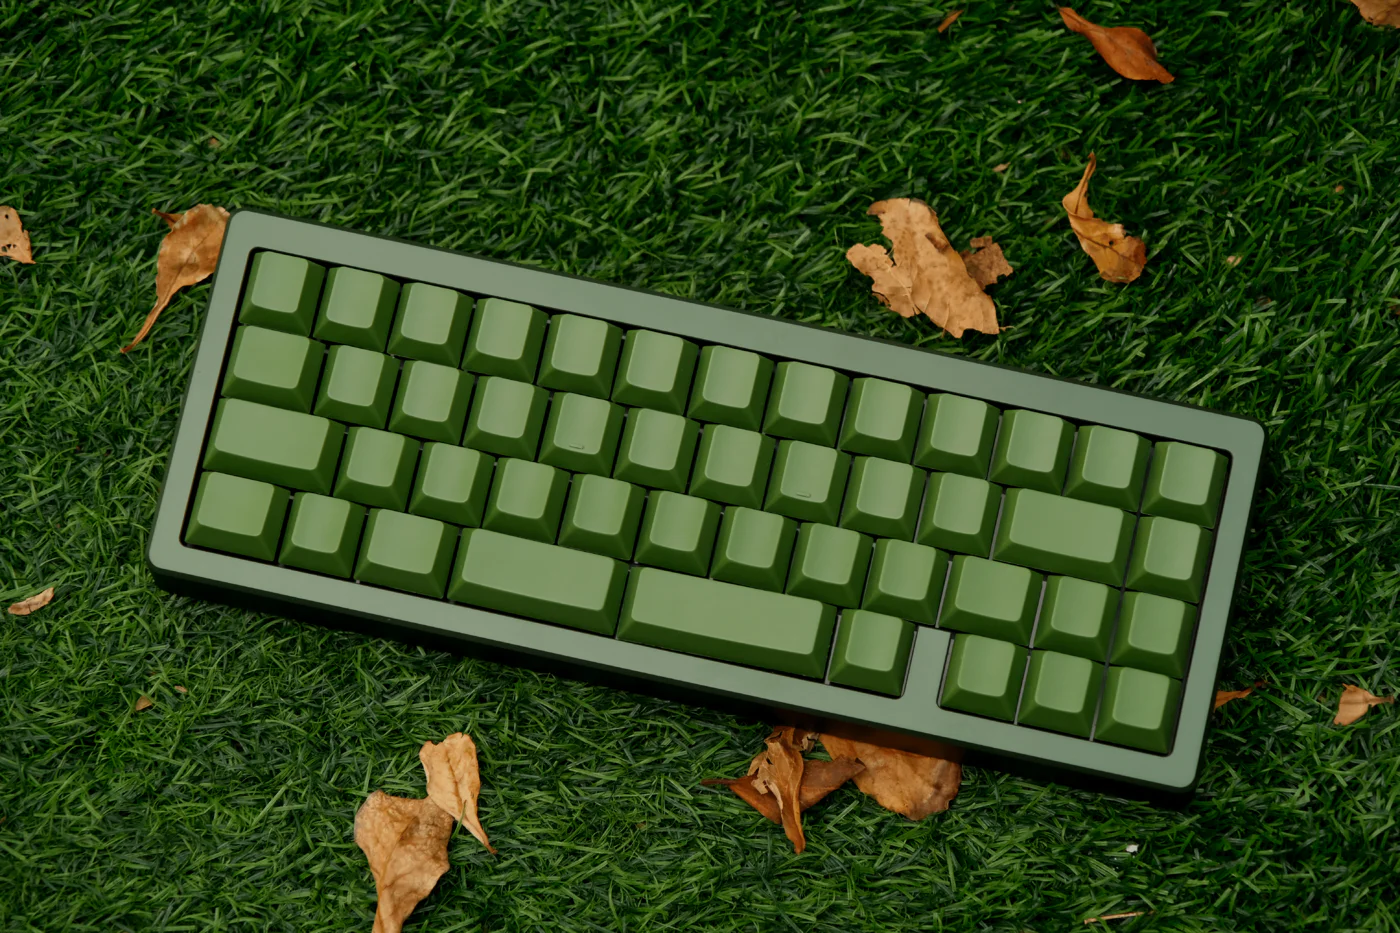 [Pre-Order] S46 R2 Wireless Keyboard Kit by NotFromSam